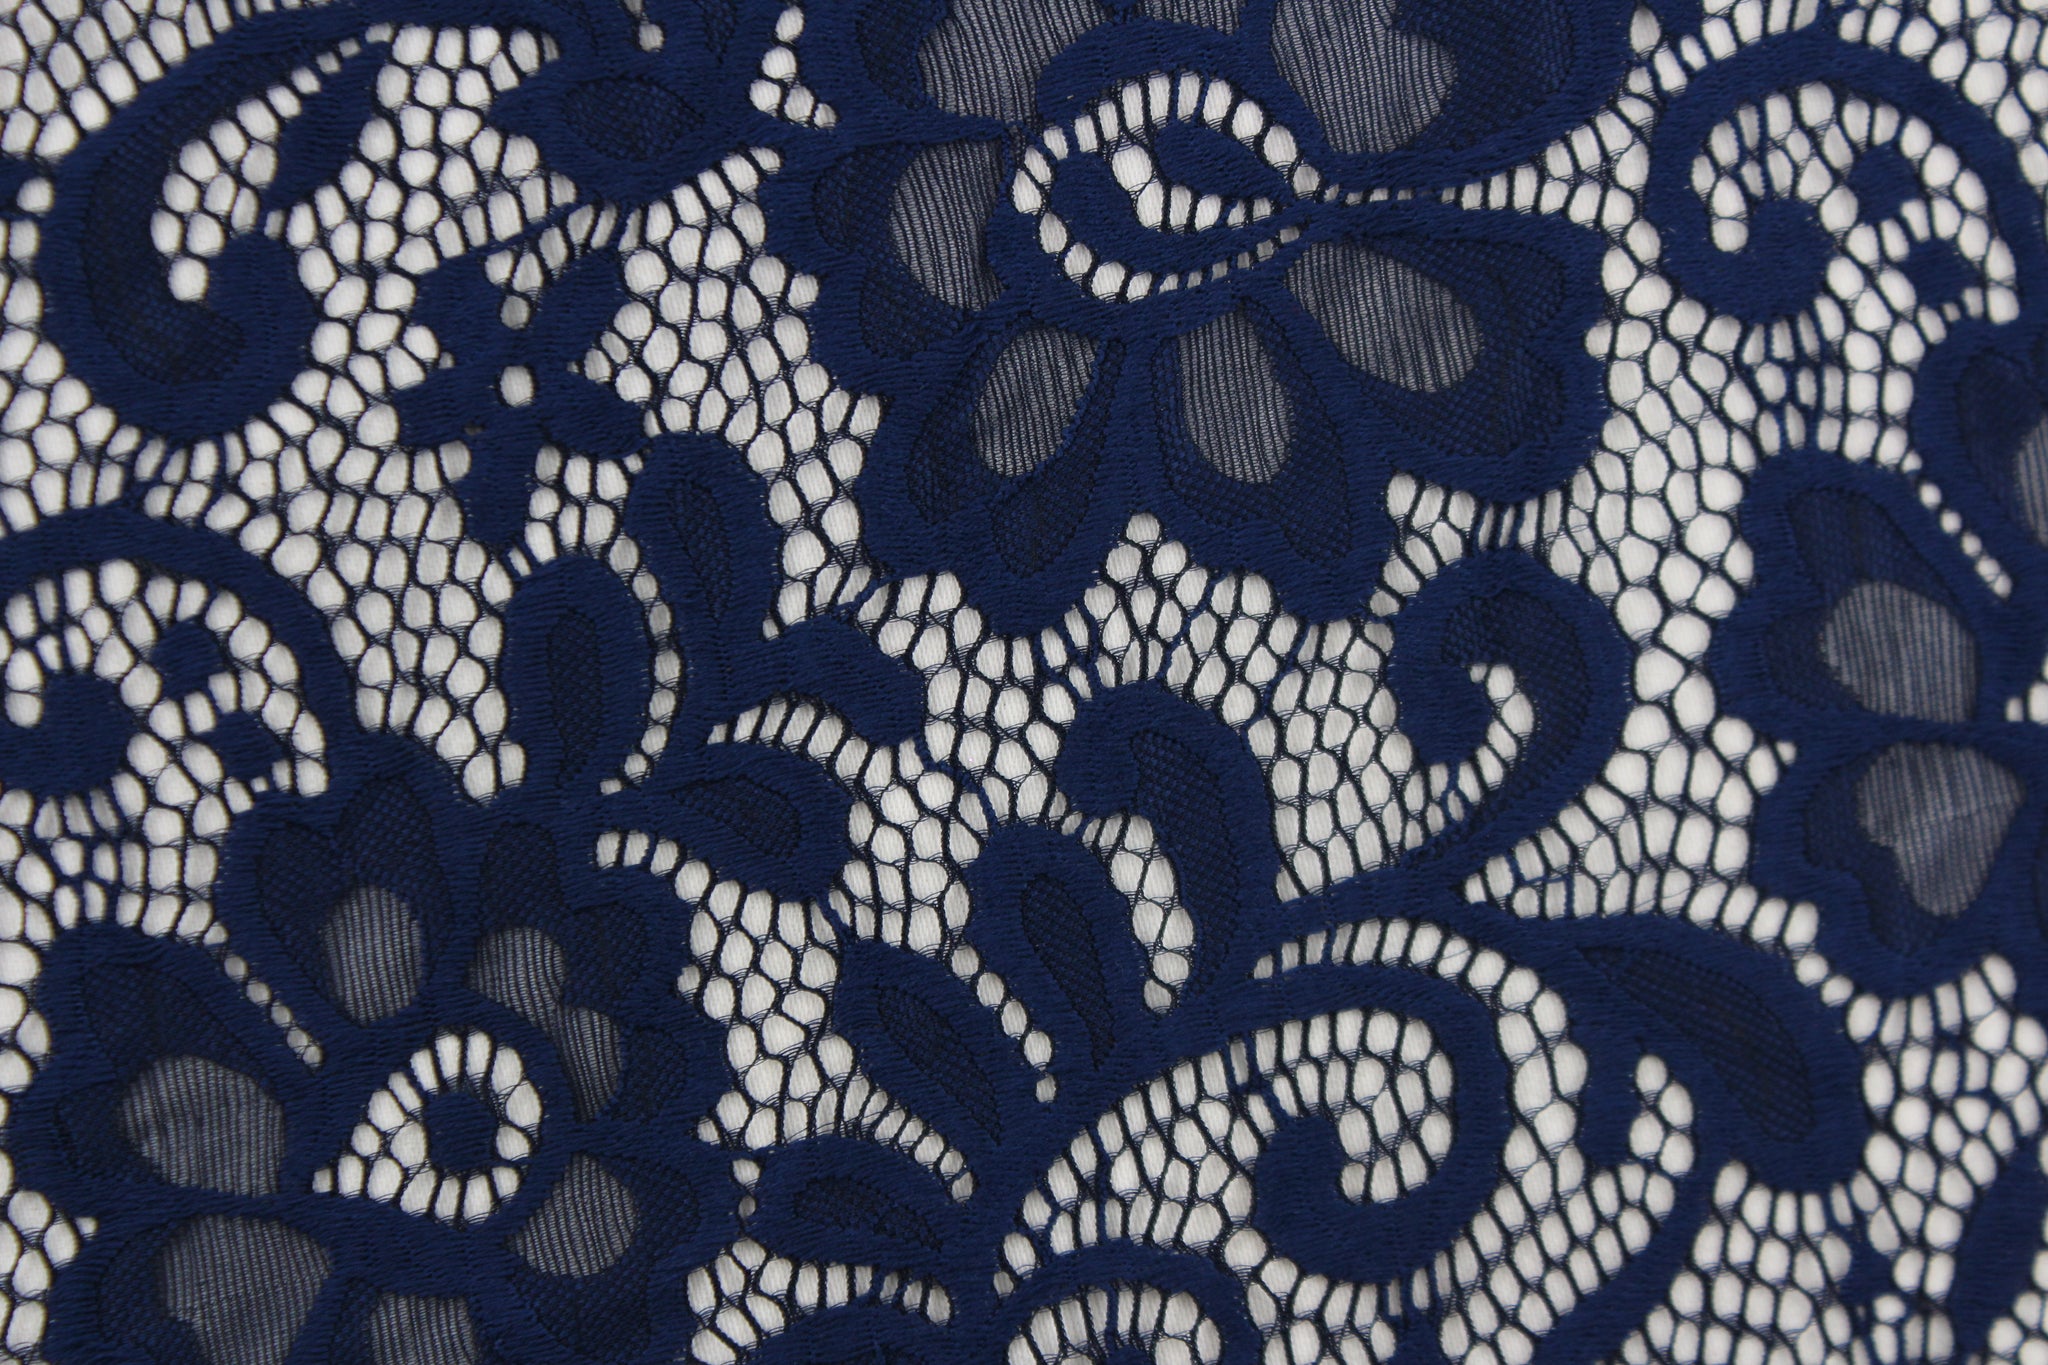 Embroidered Stretch Lace Apparel Fabric Sheer Dark Navy Floral EE106 